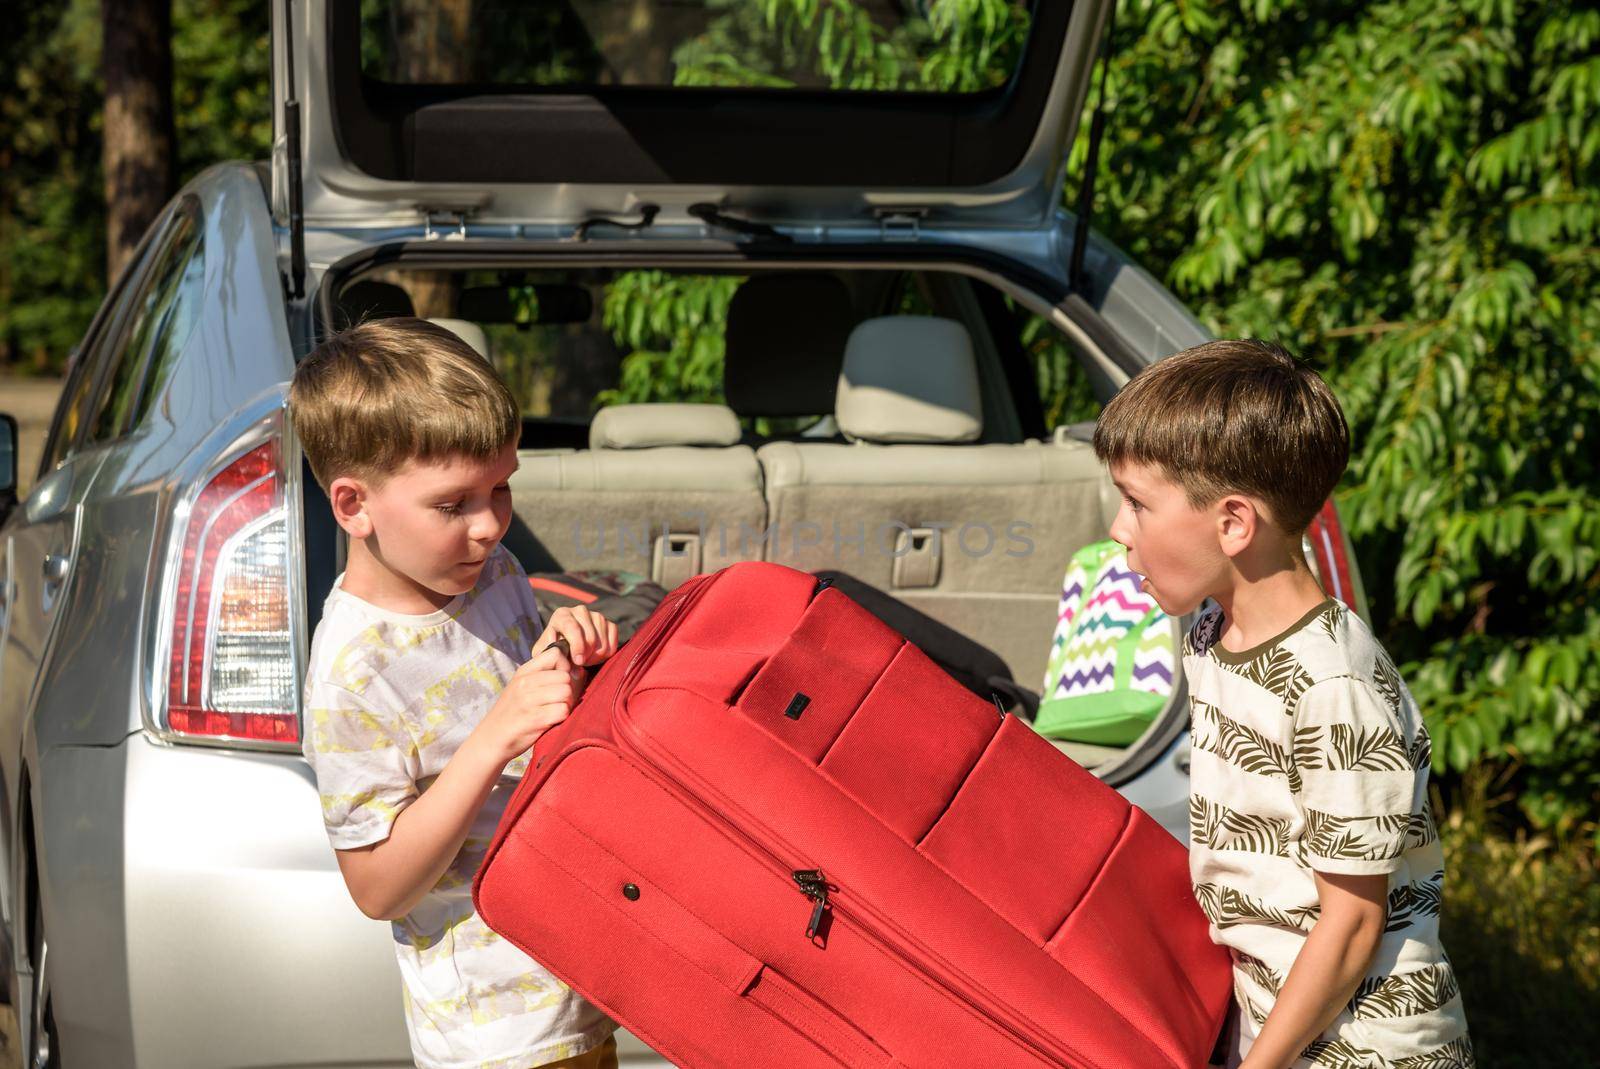 Two adorable boys holding a suitcase going on vacations with their parents. Two kids looking forward for a road trip or travel. Family travel by car by Kobysh